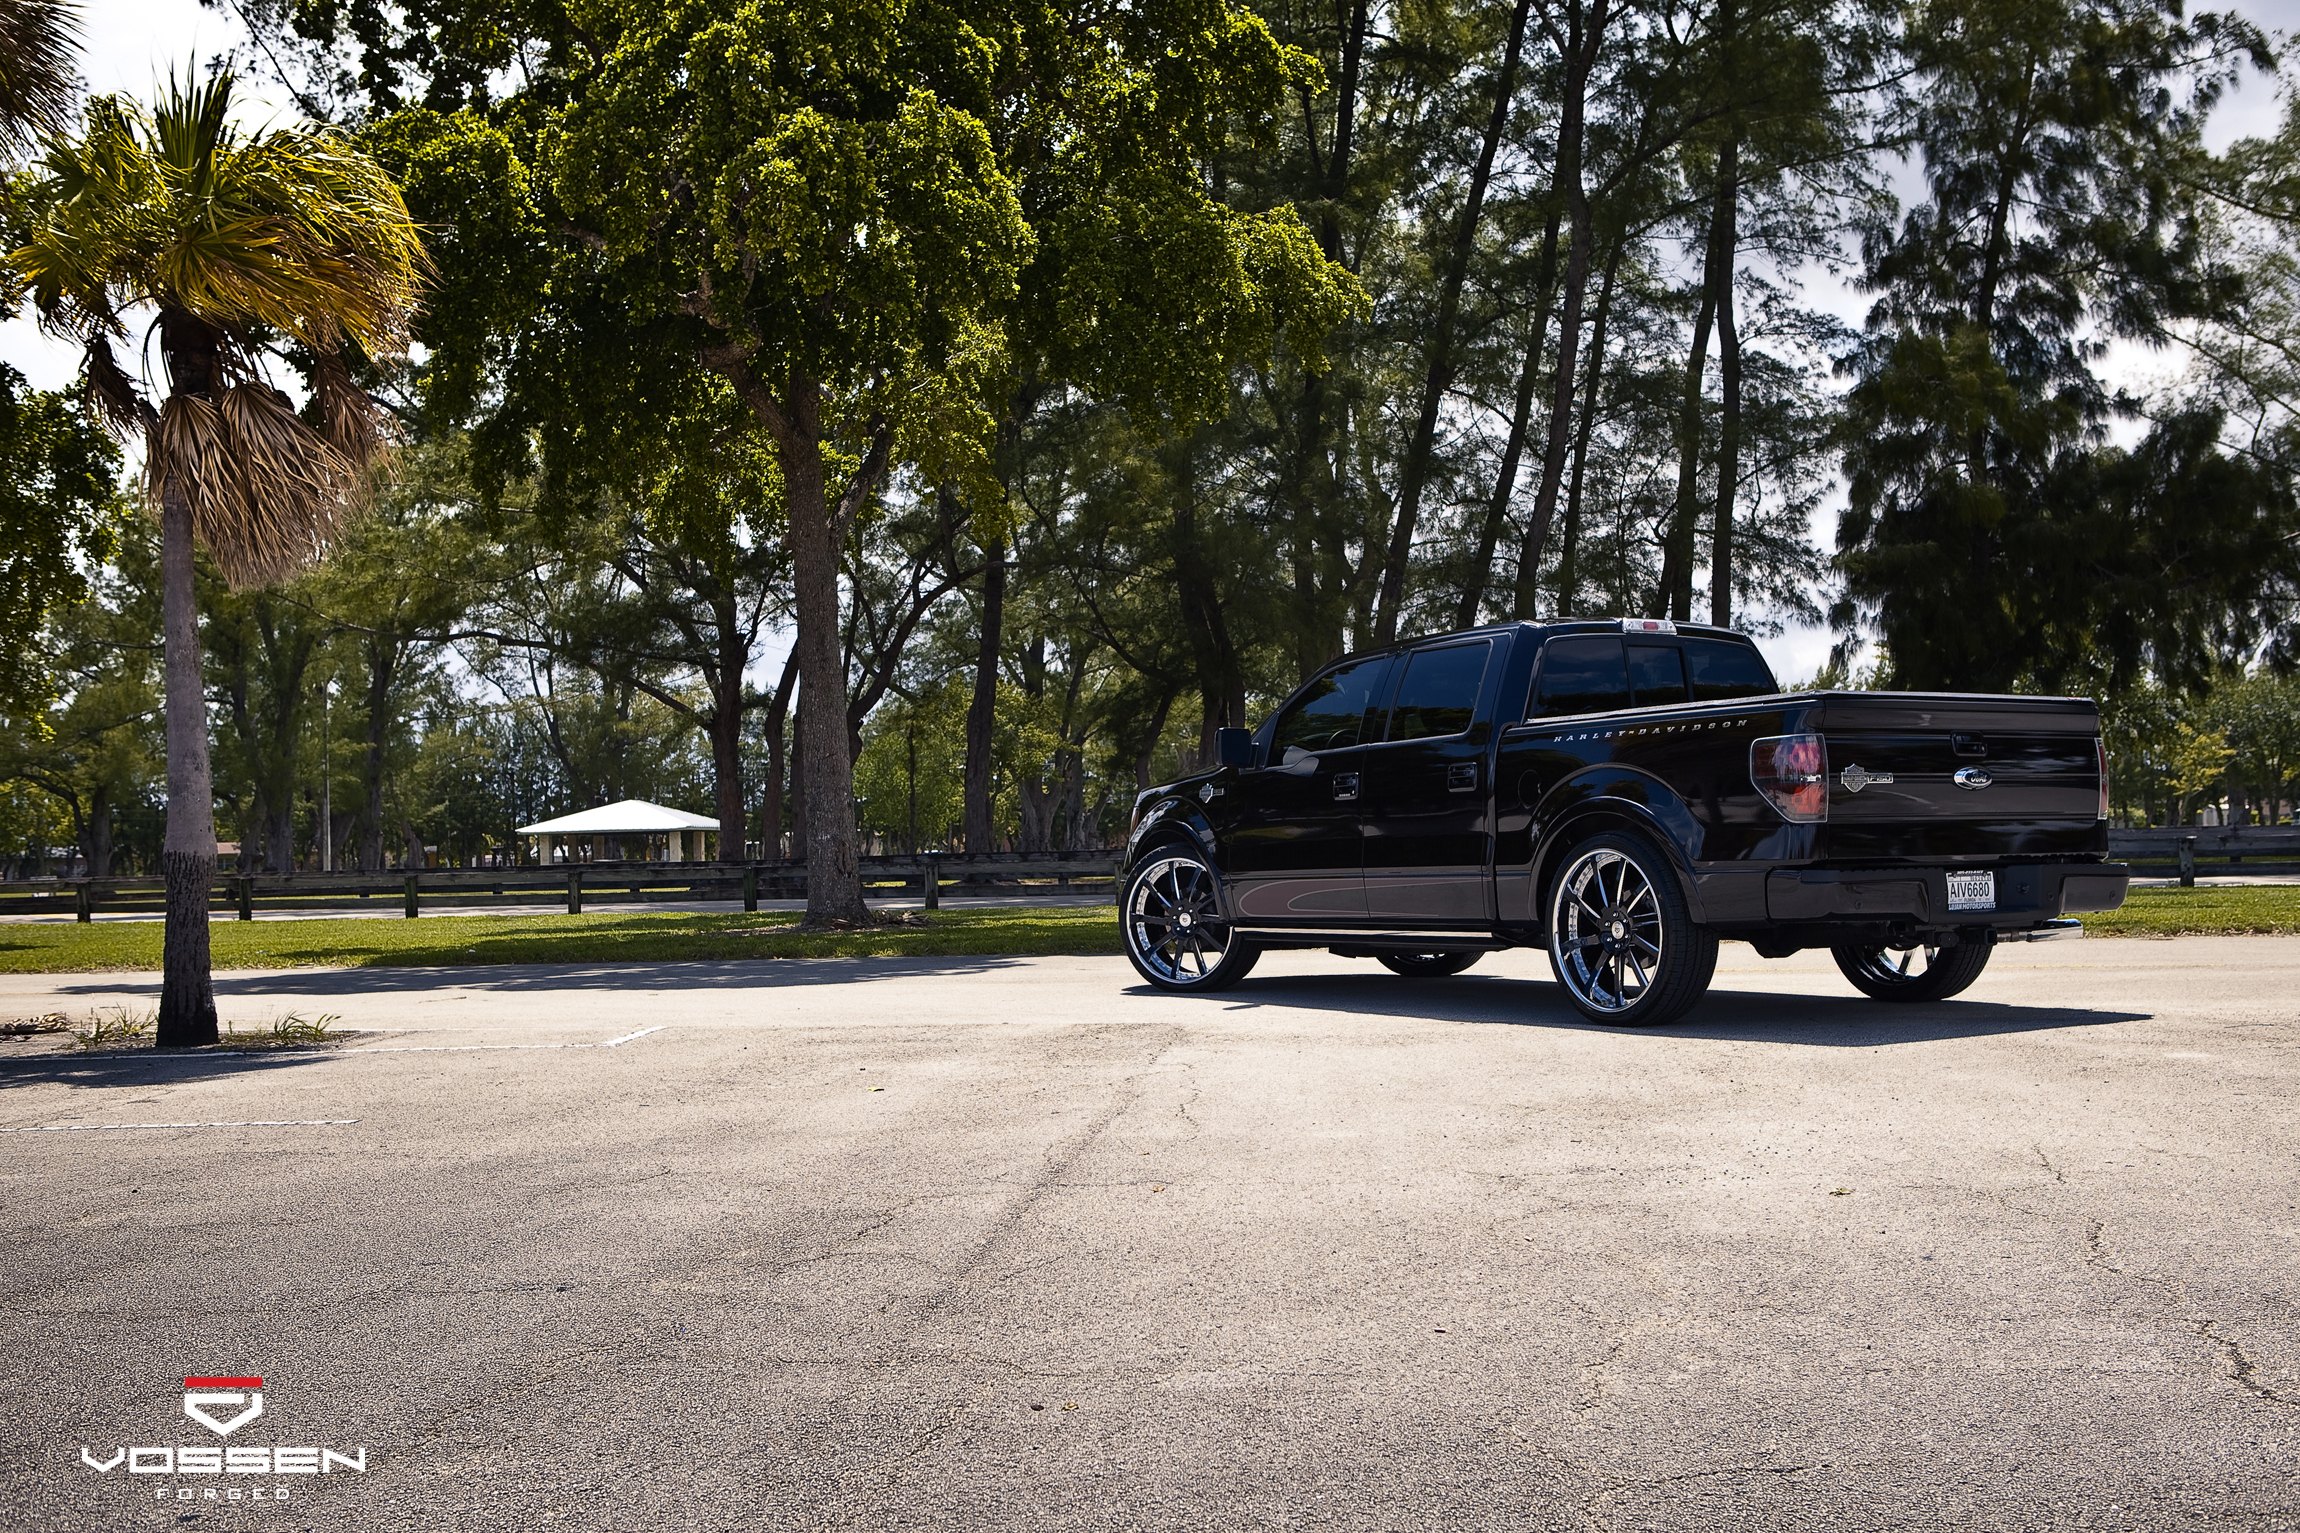 Black Ford F-150 with Custom Red LED Taillights - Photo by Vossen